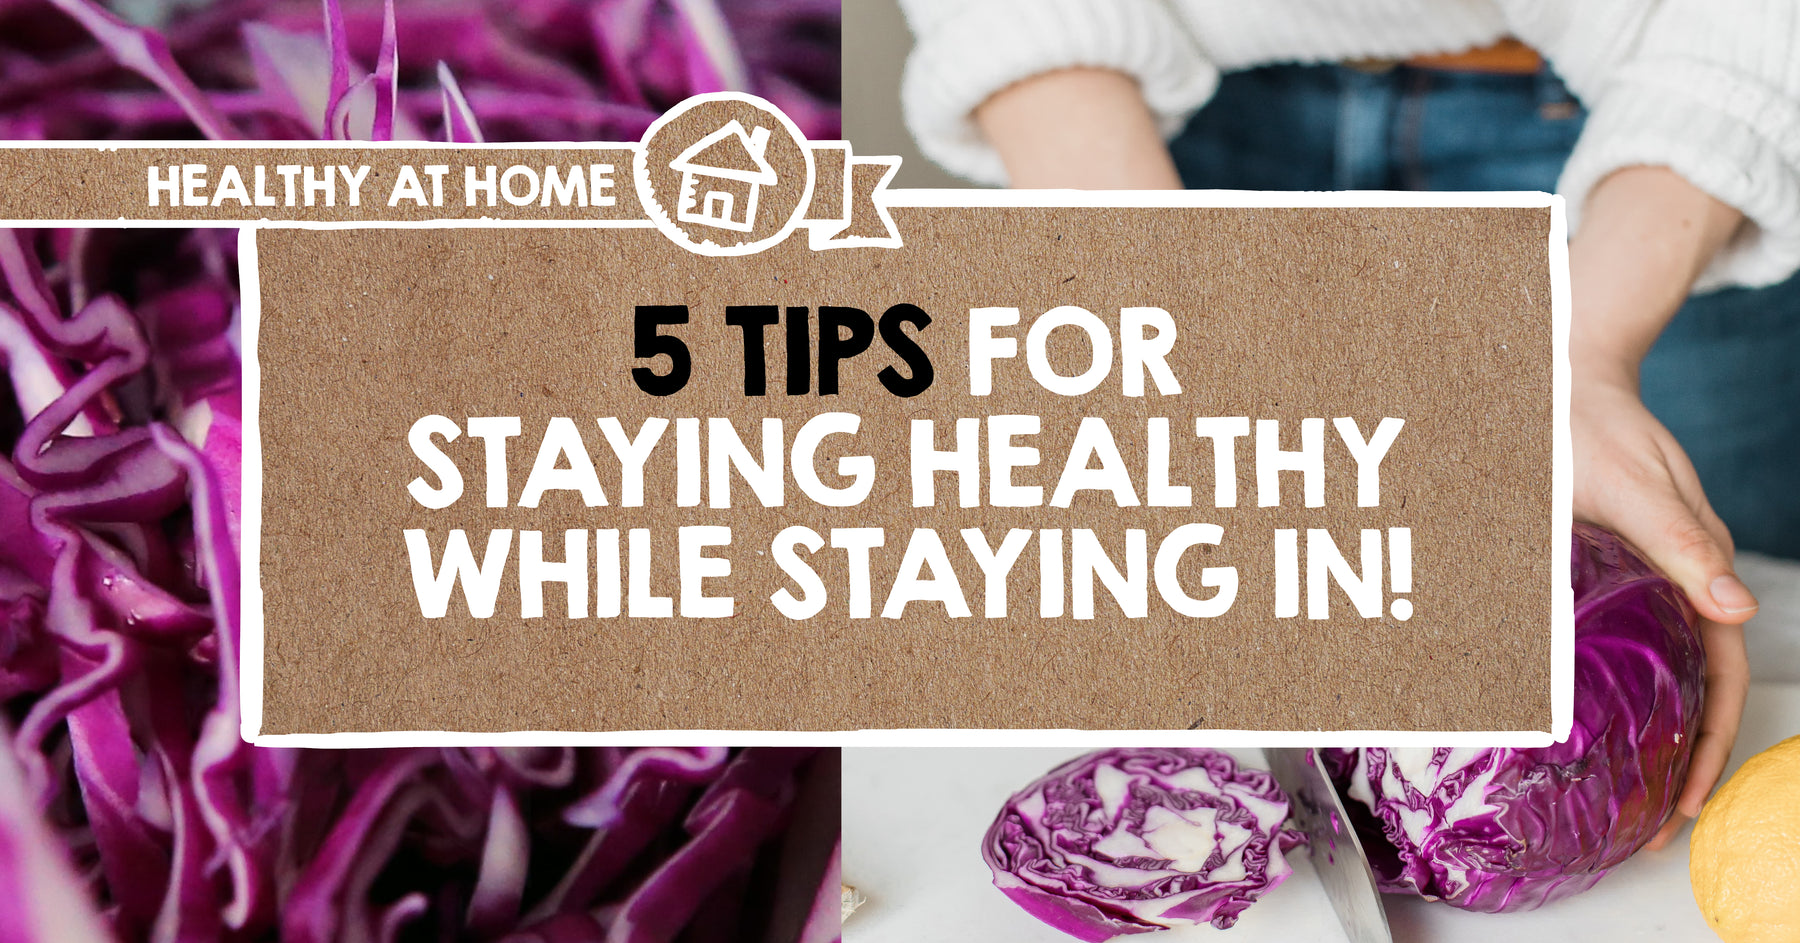 5 Tips For Staying Healthy While Staying In